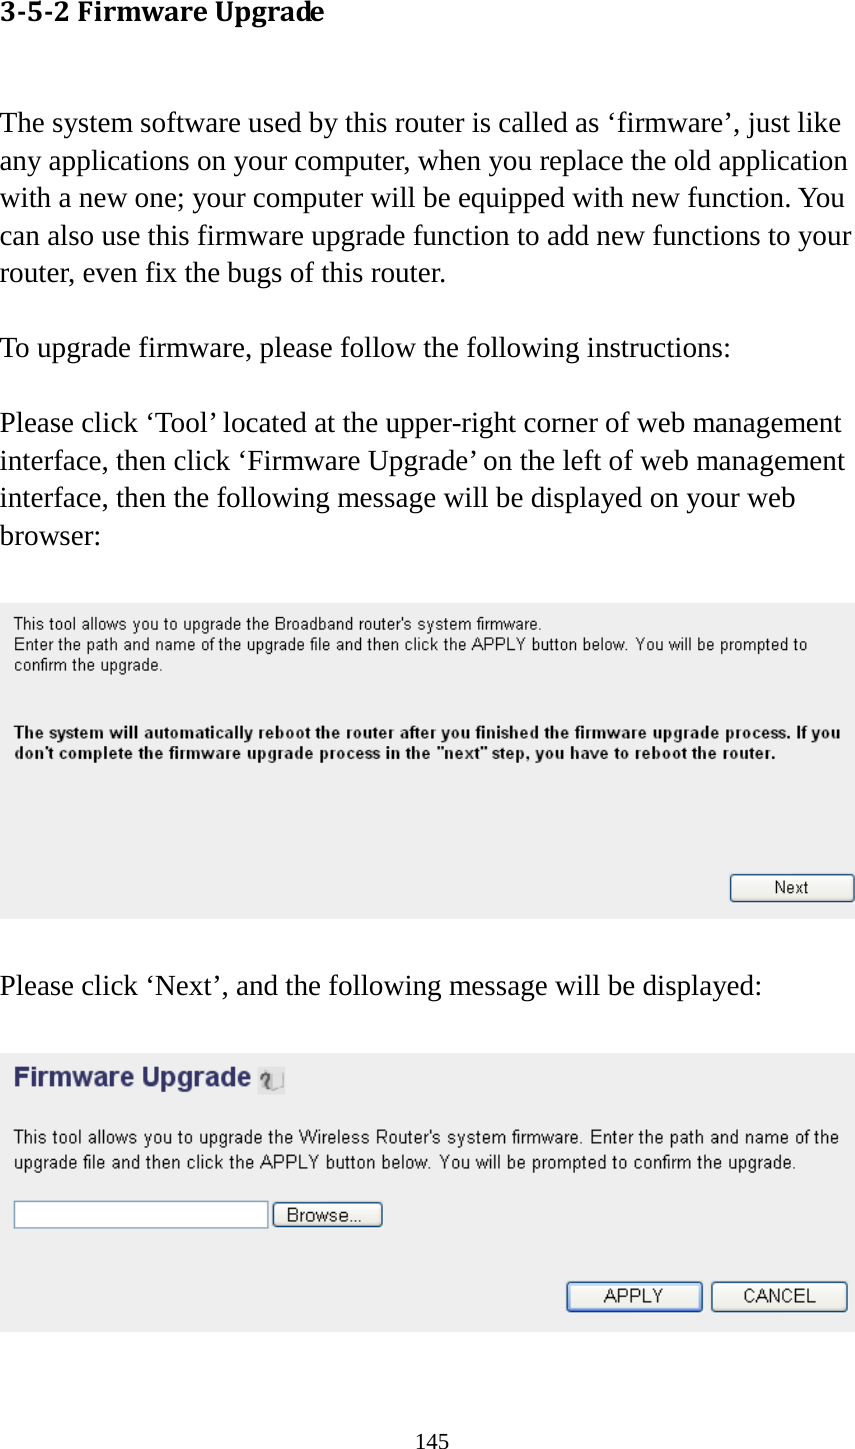 145 3-5-2 Firmware Upgrade  The system software used by this router is called as ‘firmware’, just like any applications on your computer, when you replace the old application with a new one; your computer will be equipped with new function. You can also use this firmware upgrade function to add new functions to your router, even fix the bugs of this router.  To upgrade firmware, please follow the following instructions:  Please click ‘Tool’ located at the upper-right corner of web management interface, then click ‘Firmware Upgrade’ on the left of web management interface, then the following message will be displayed on your web browser:    Please click ‘Next’, and the following message will be displayed:    